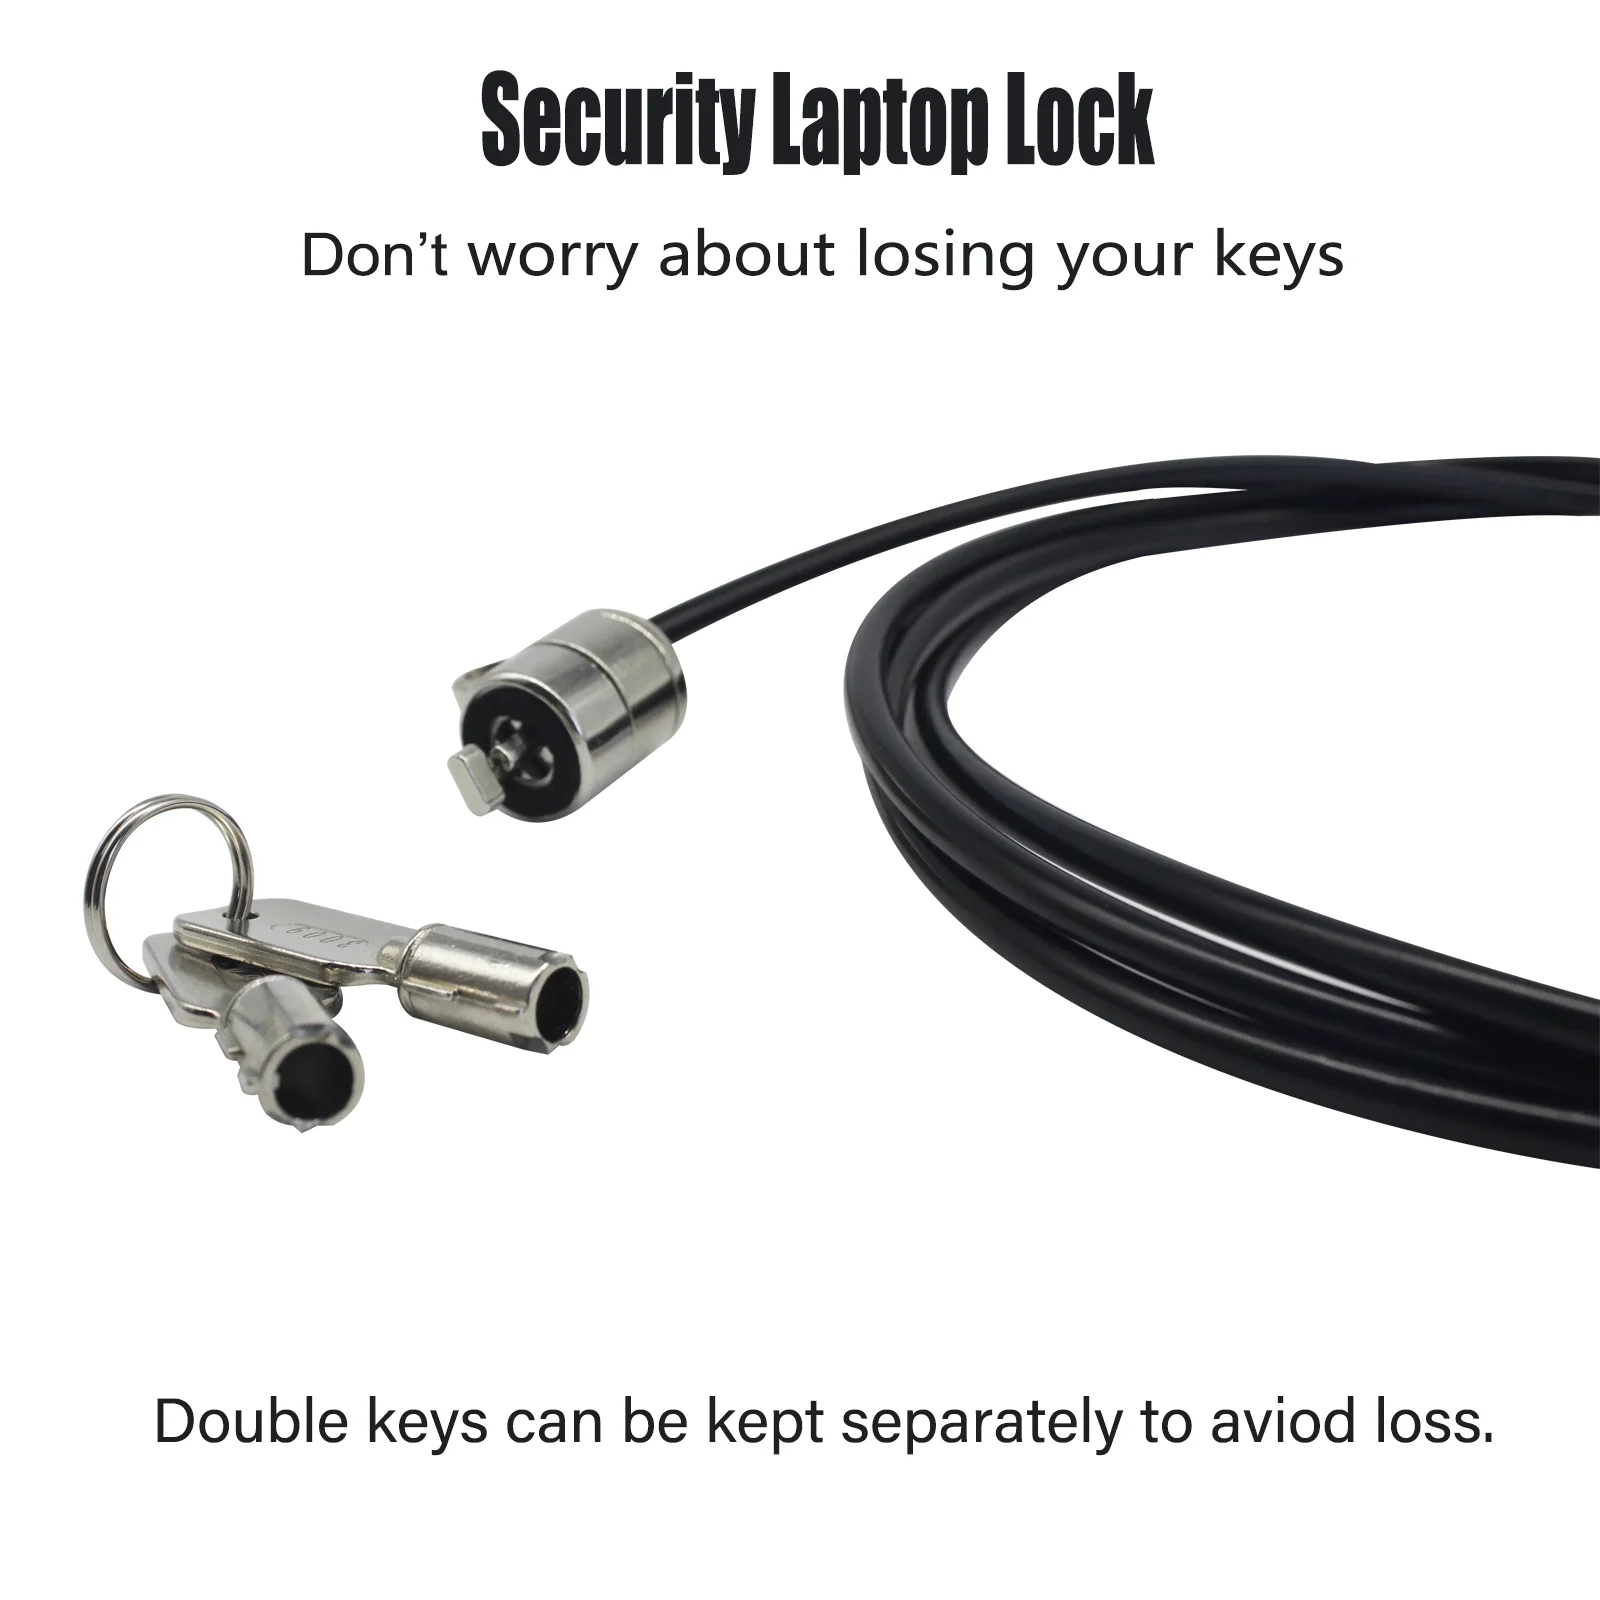 Hot sale zinc alloy computer security cable lock with keys anti-theft steel laptop security lock cable chain for 3x7 slot